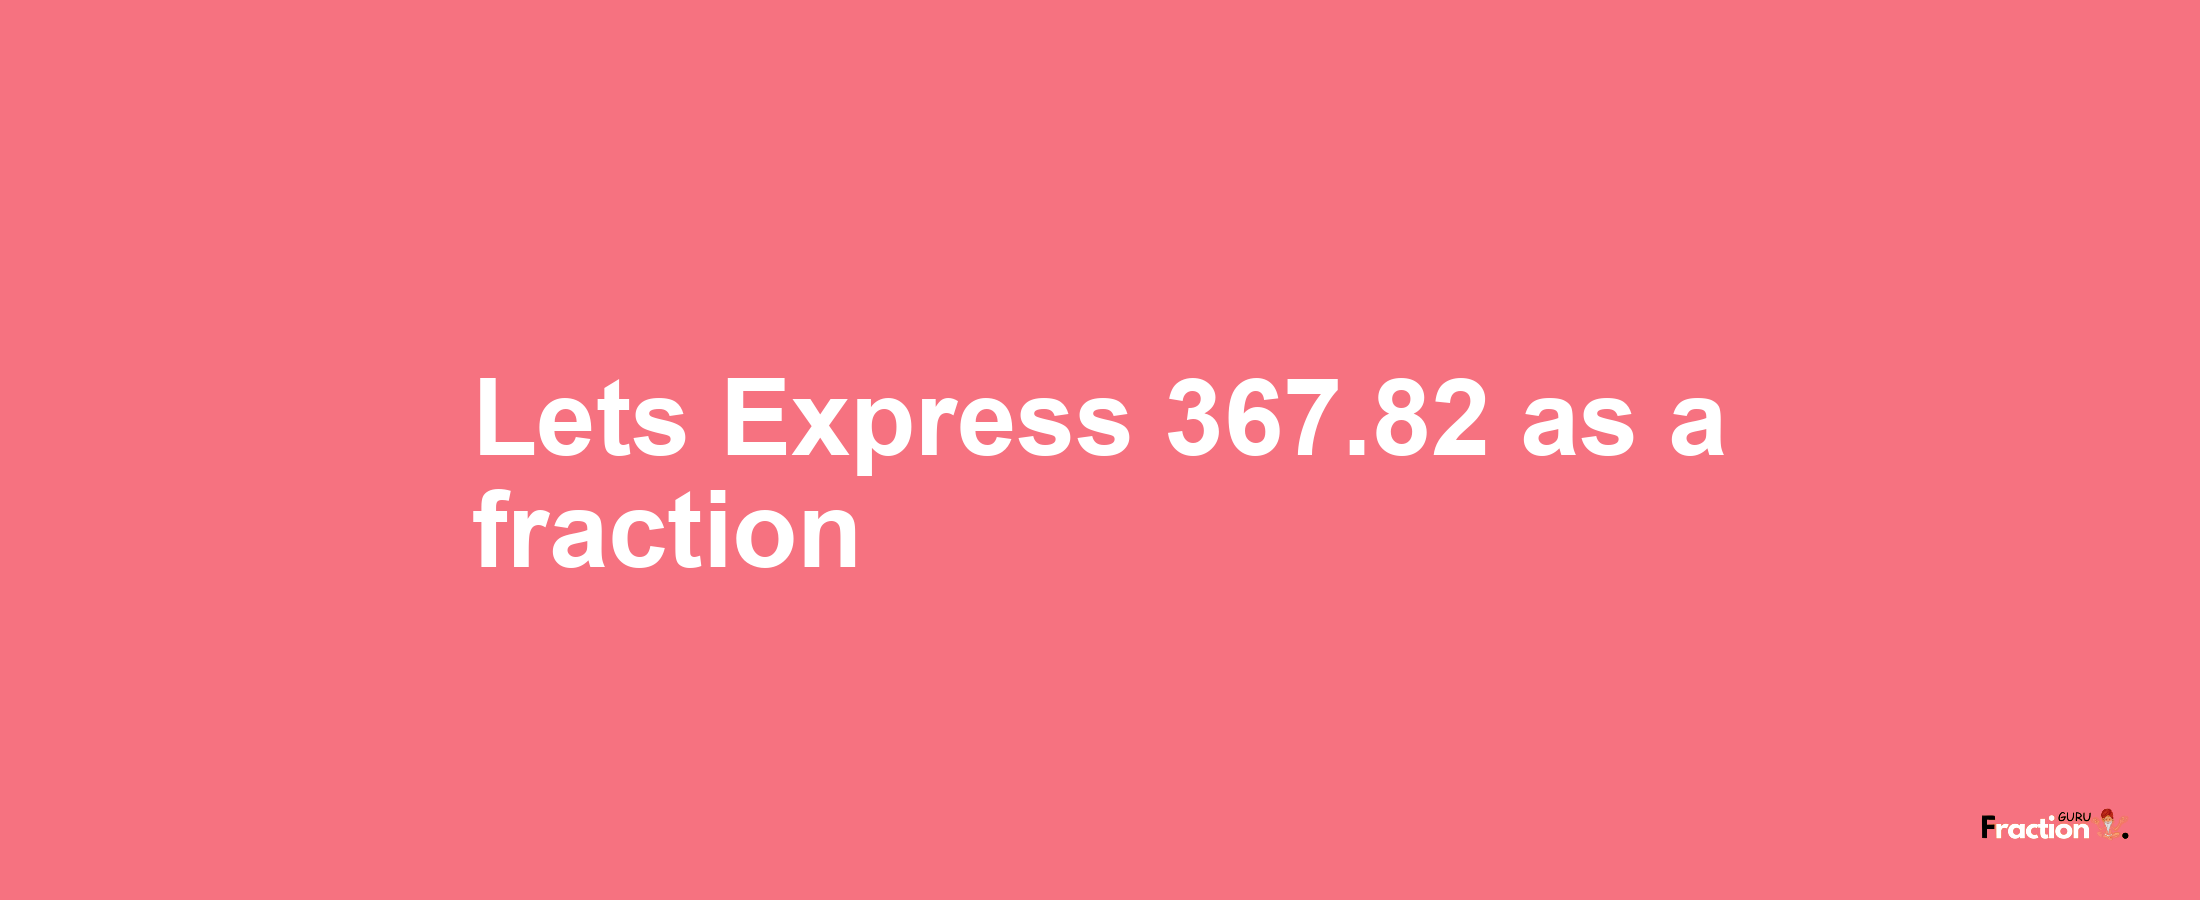 Lets Express 367.82 as afraction